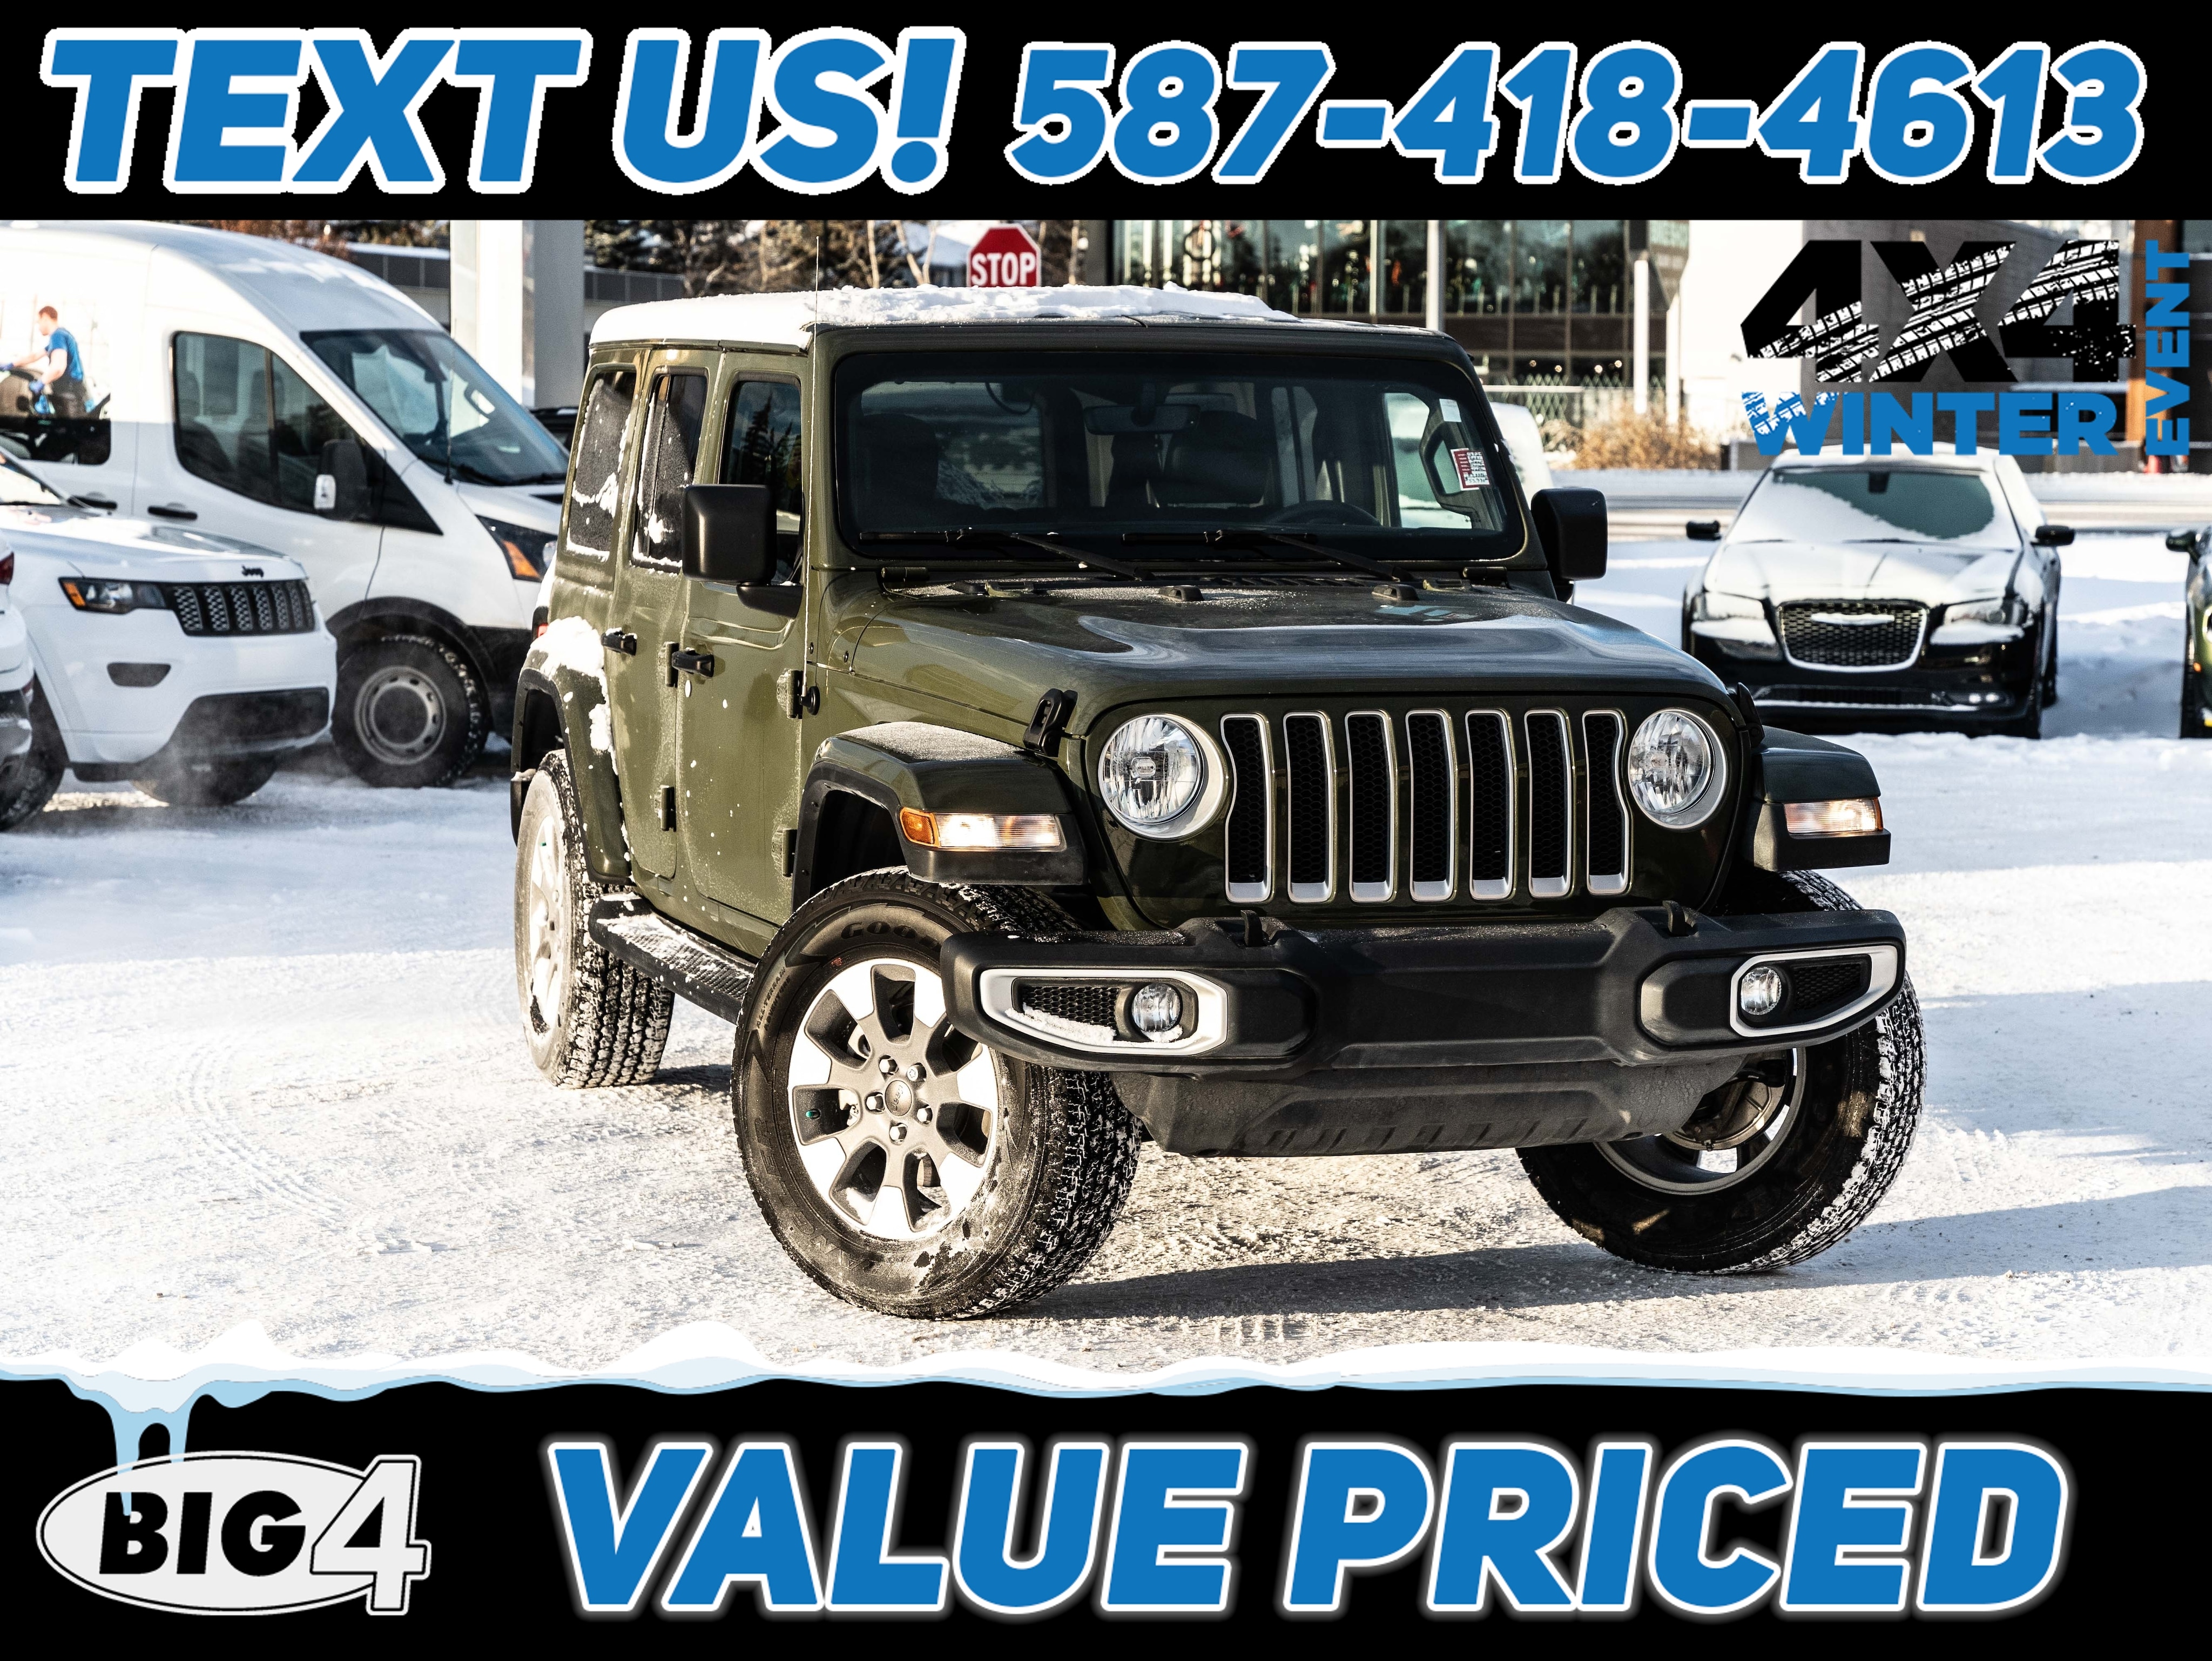 Used 2021 Jeep Wrangler Unlimited Sahara Automatic For Sale in Calgary  (Highfield / Burns Industrial) AB | Serving Red Deer, Airdrie, Chestermere  & Okotoks | VIN:1C4HJXEN7MW683220